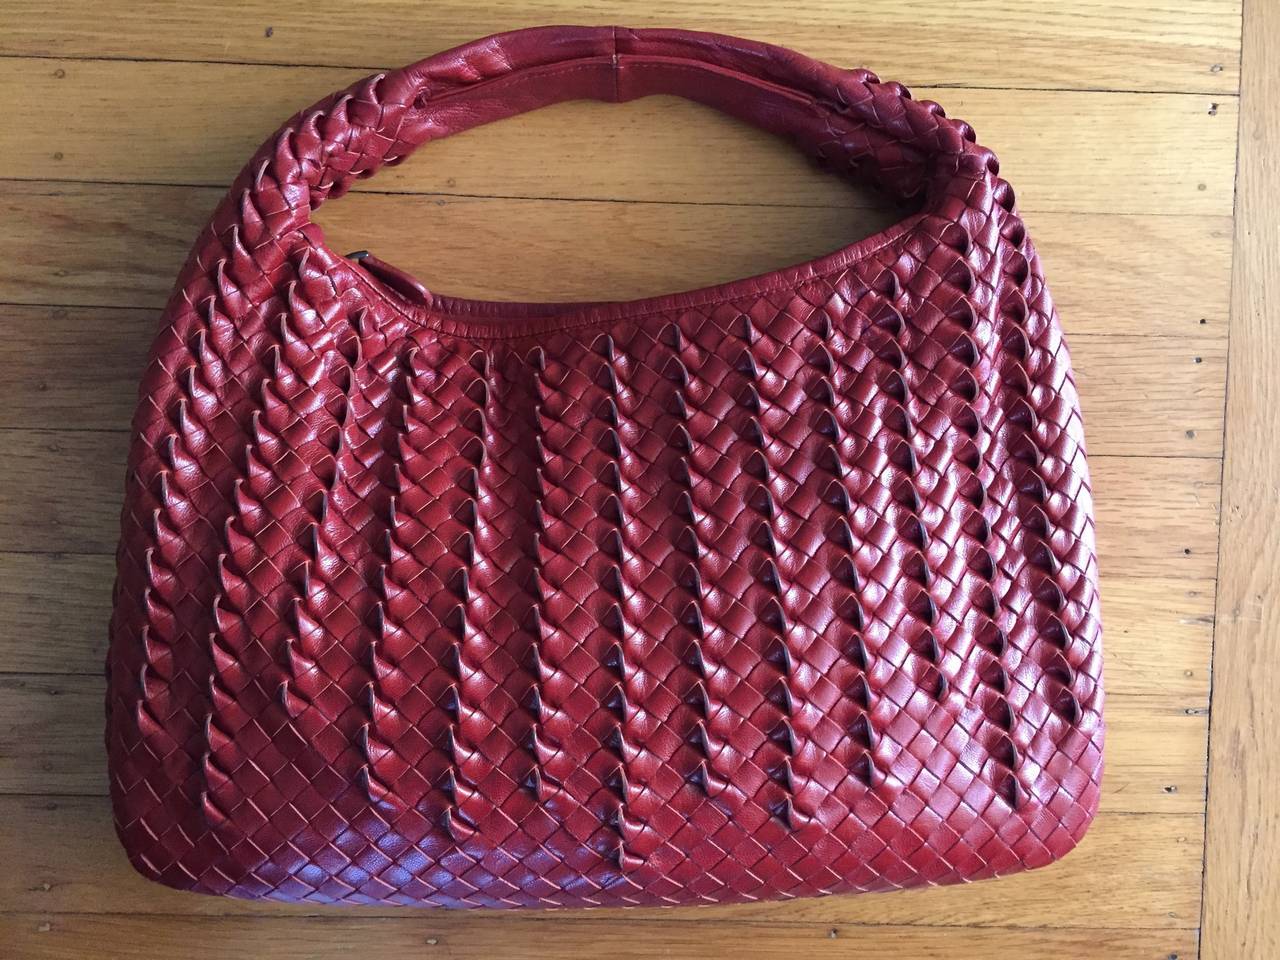 Bottega Veneta Red Intrecciato Leather Hobo Bag.

This is a different type of Intrecciato weaving, it has a twist.

This is such a gorgeous bag, the photos don't do it justice. A classic to own a lifetime.

In excellent condition.
15 1/2